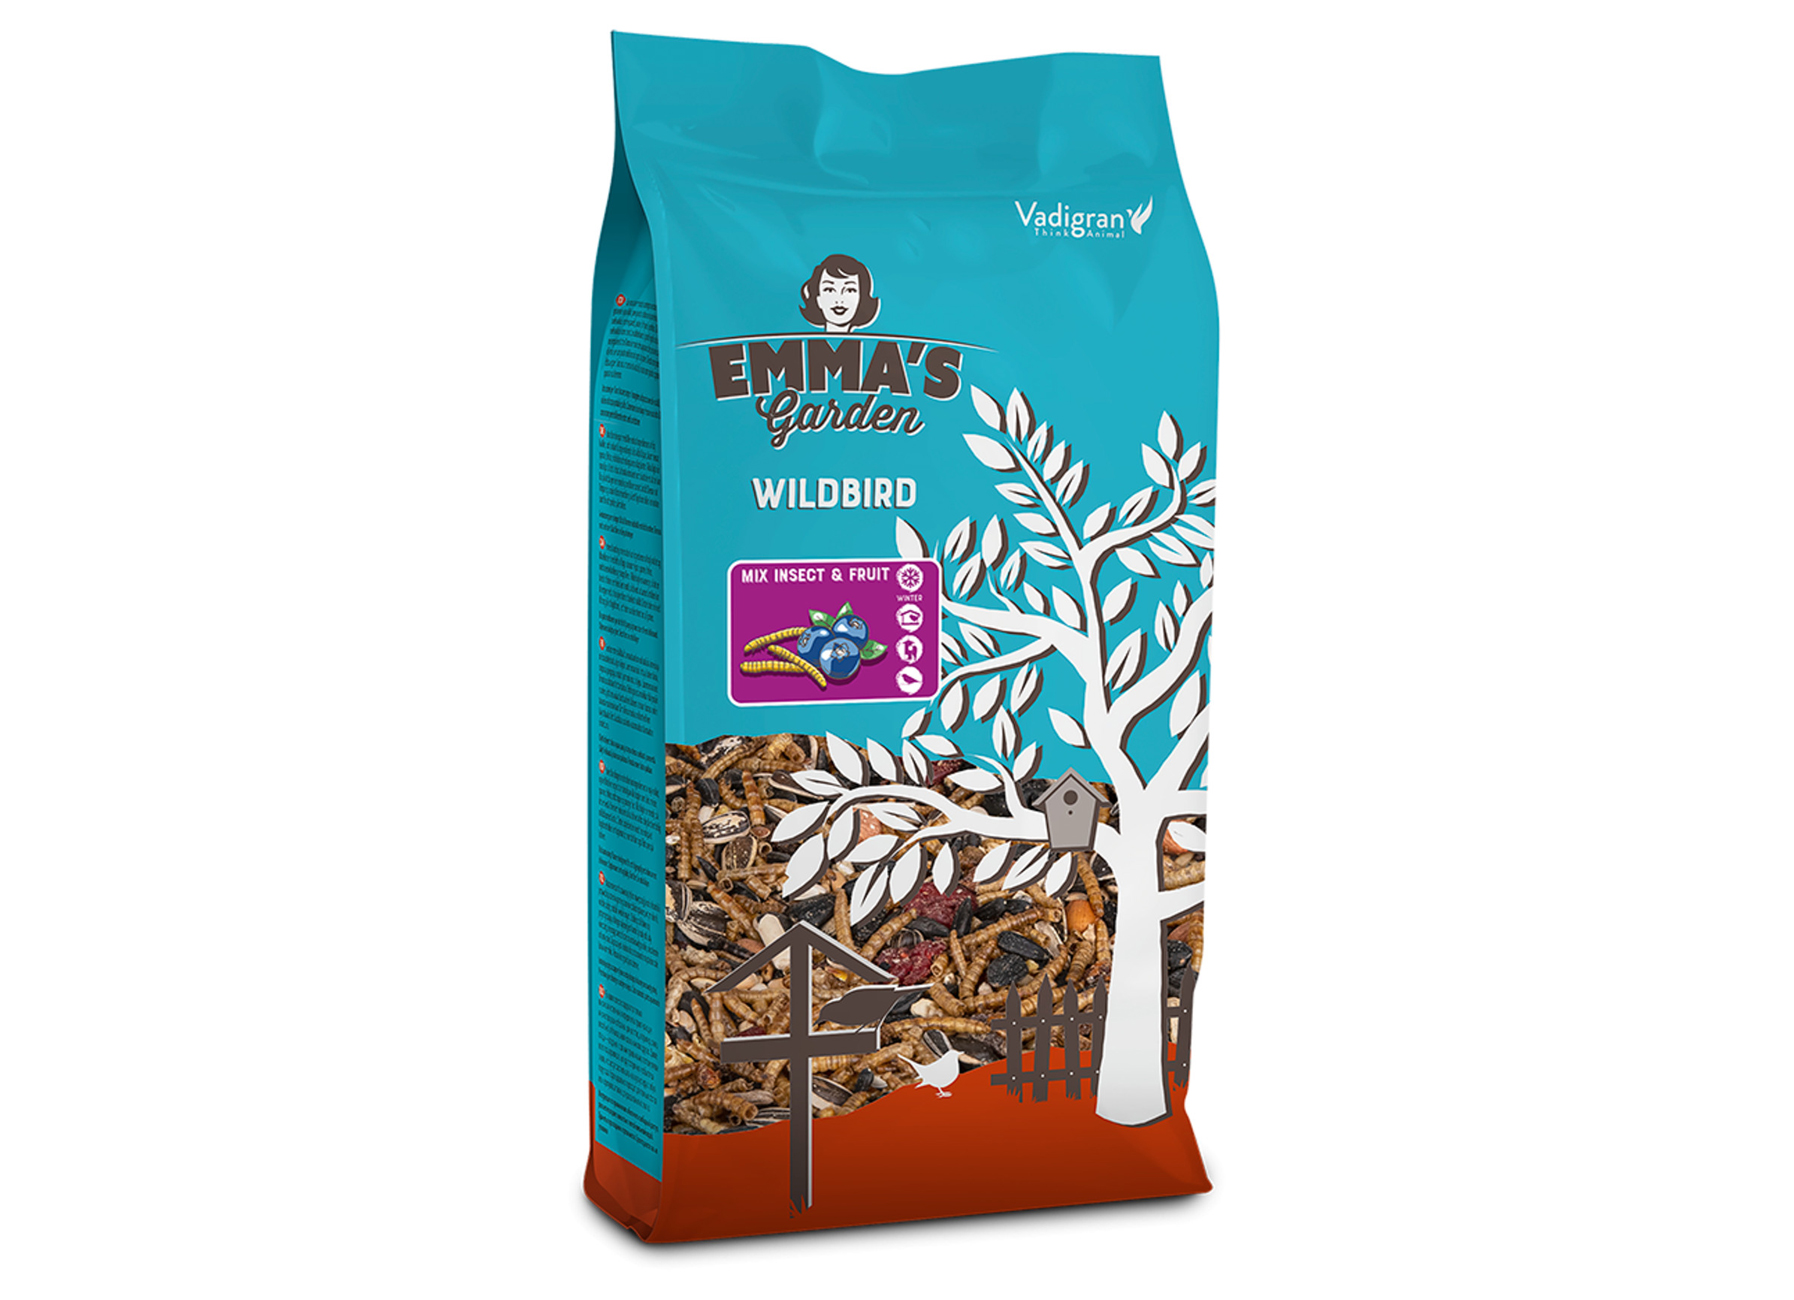 EMMA MIX INSECT & FRUIT 850G